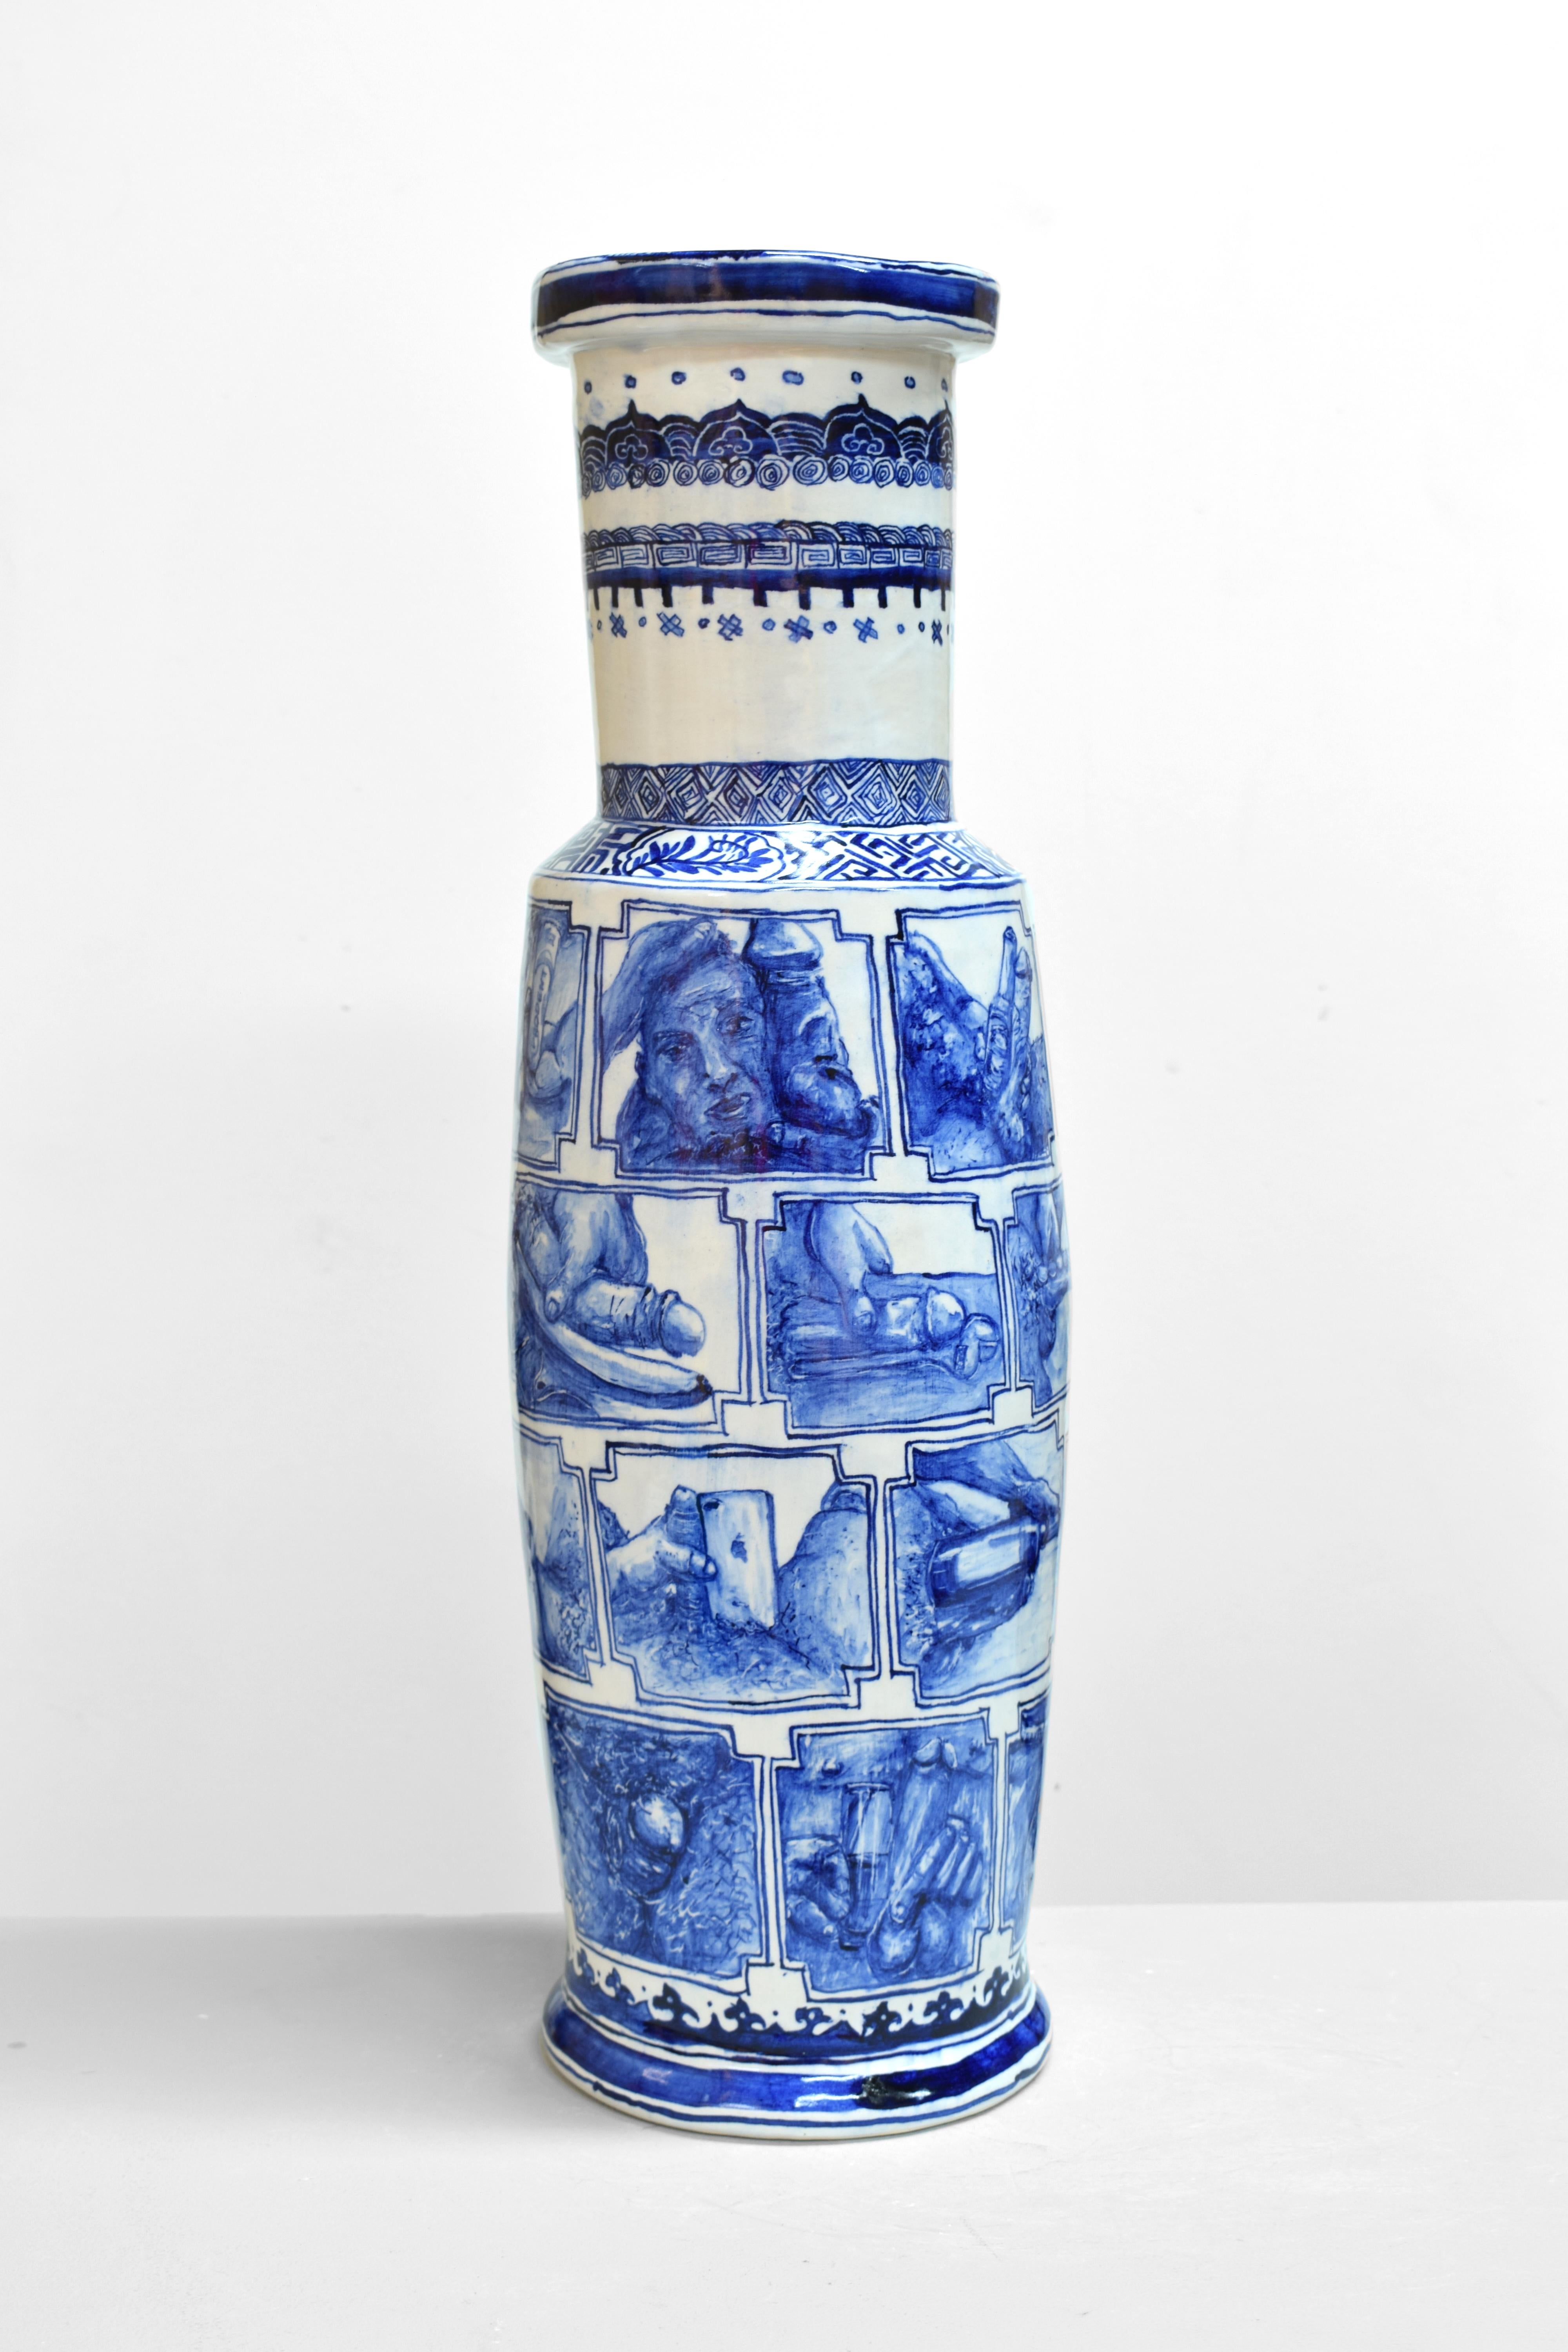 Tantalising vase from the Divine Realm - Mixed Media Art by Chris Rijk